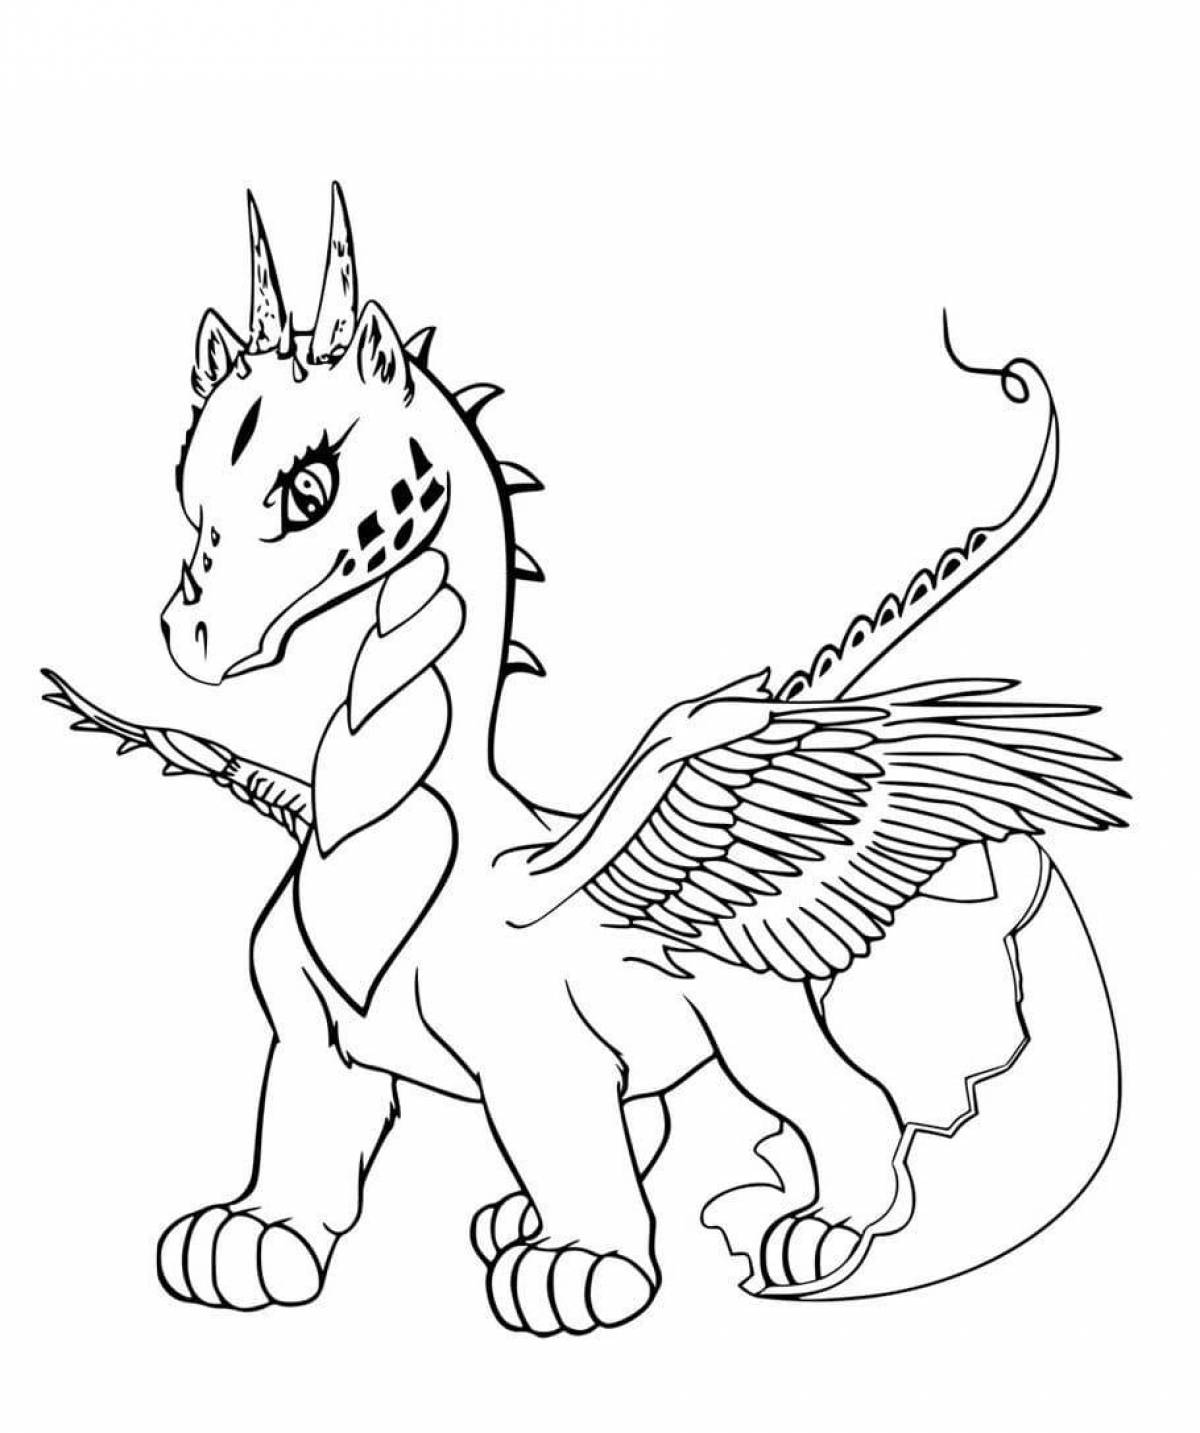 Fancy dragon coloring for kids